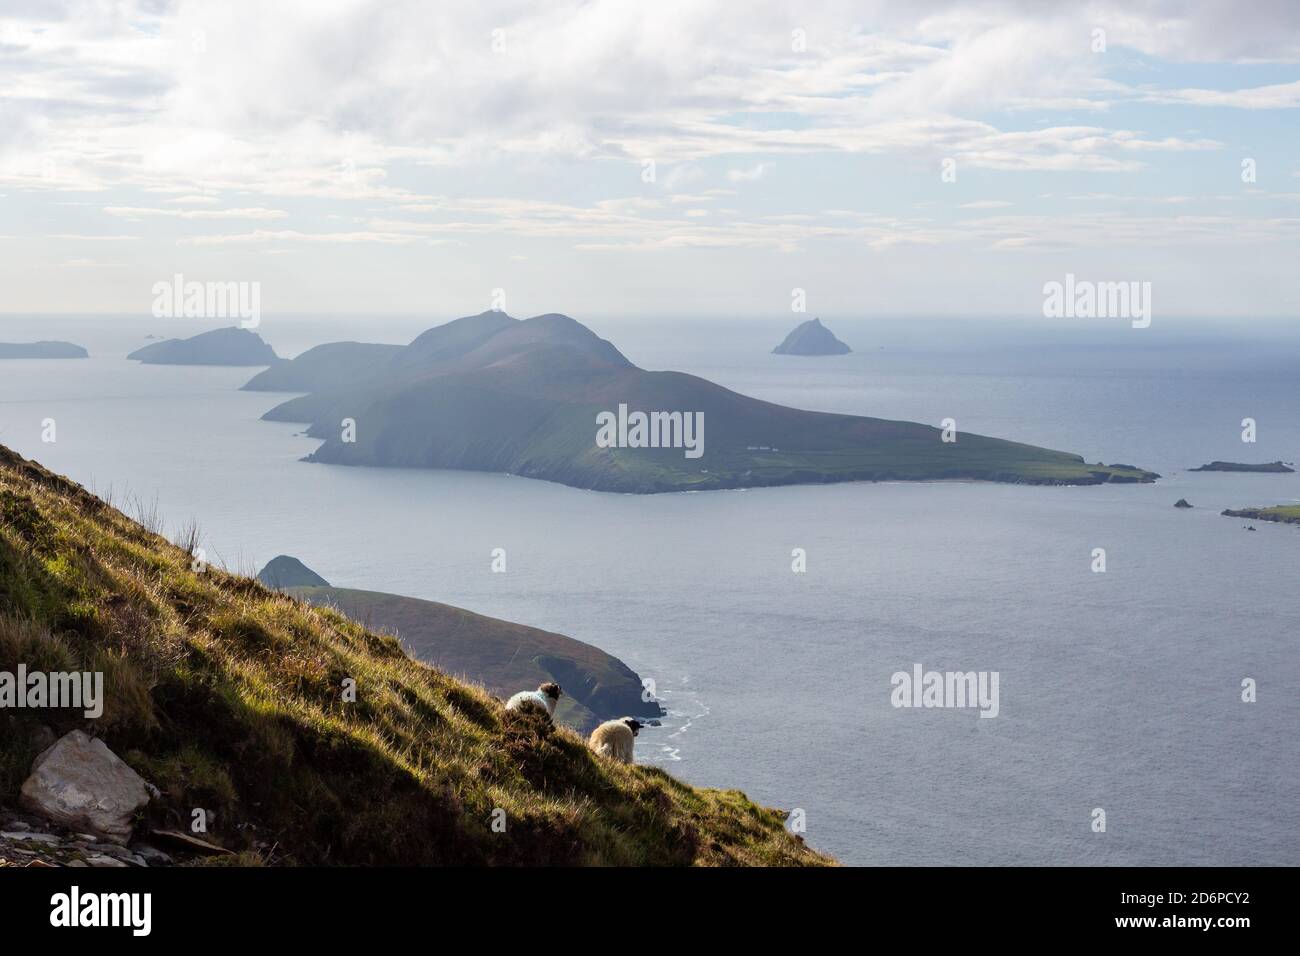 The Great Blasket Island viewed from the slopes of Mount Eagle (Sliabh an Iolair) on the Dingle Peninsula along the Wild Atlantic Way in Ireland Stock Photo